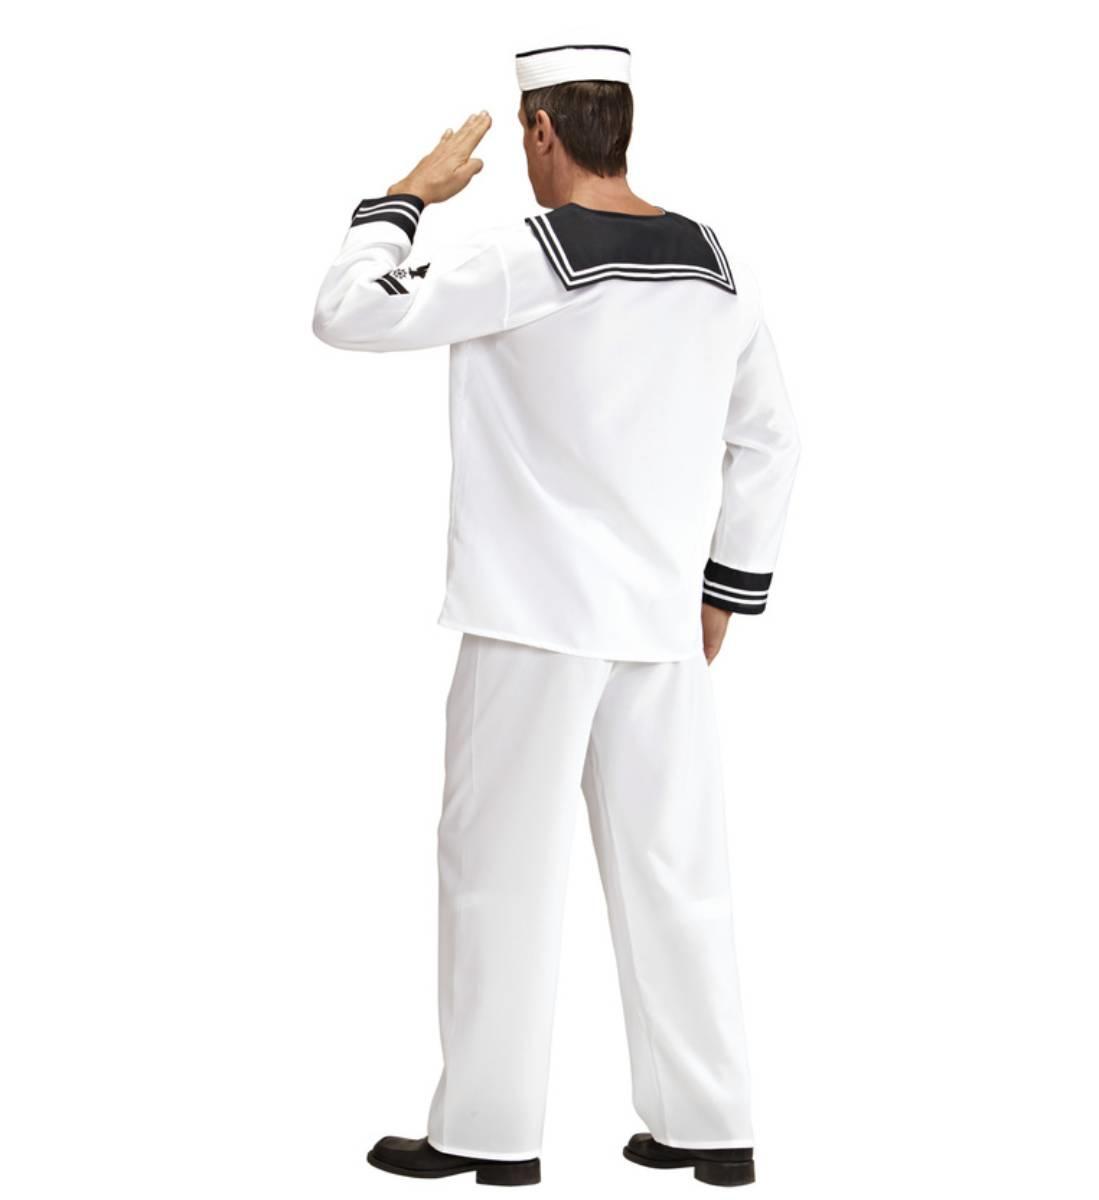 Men's Naval or Village People sailor costume by Widmann 5772S available here at Karnival Costumes online party shop